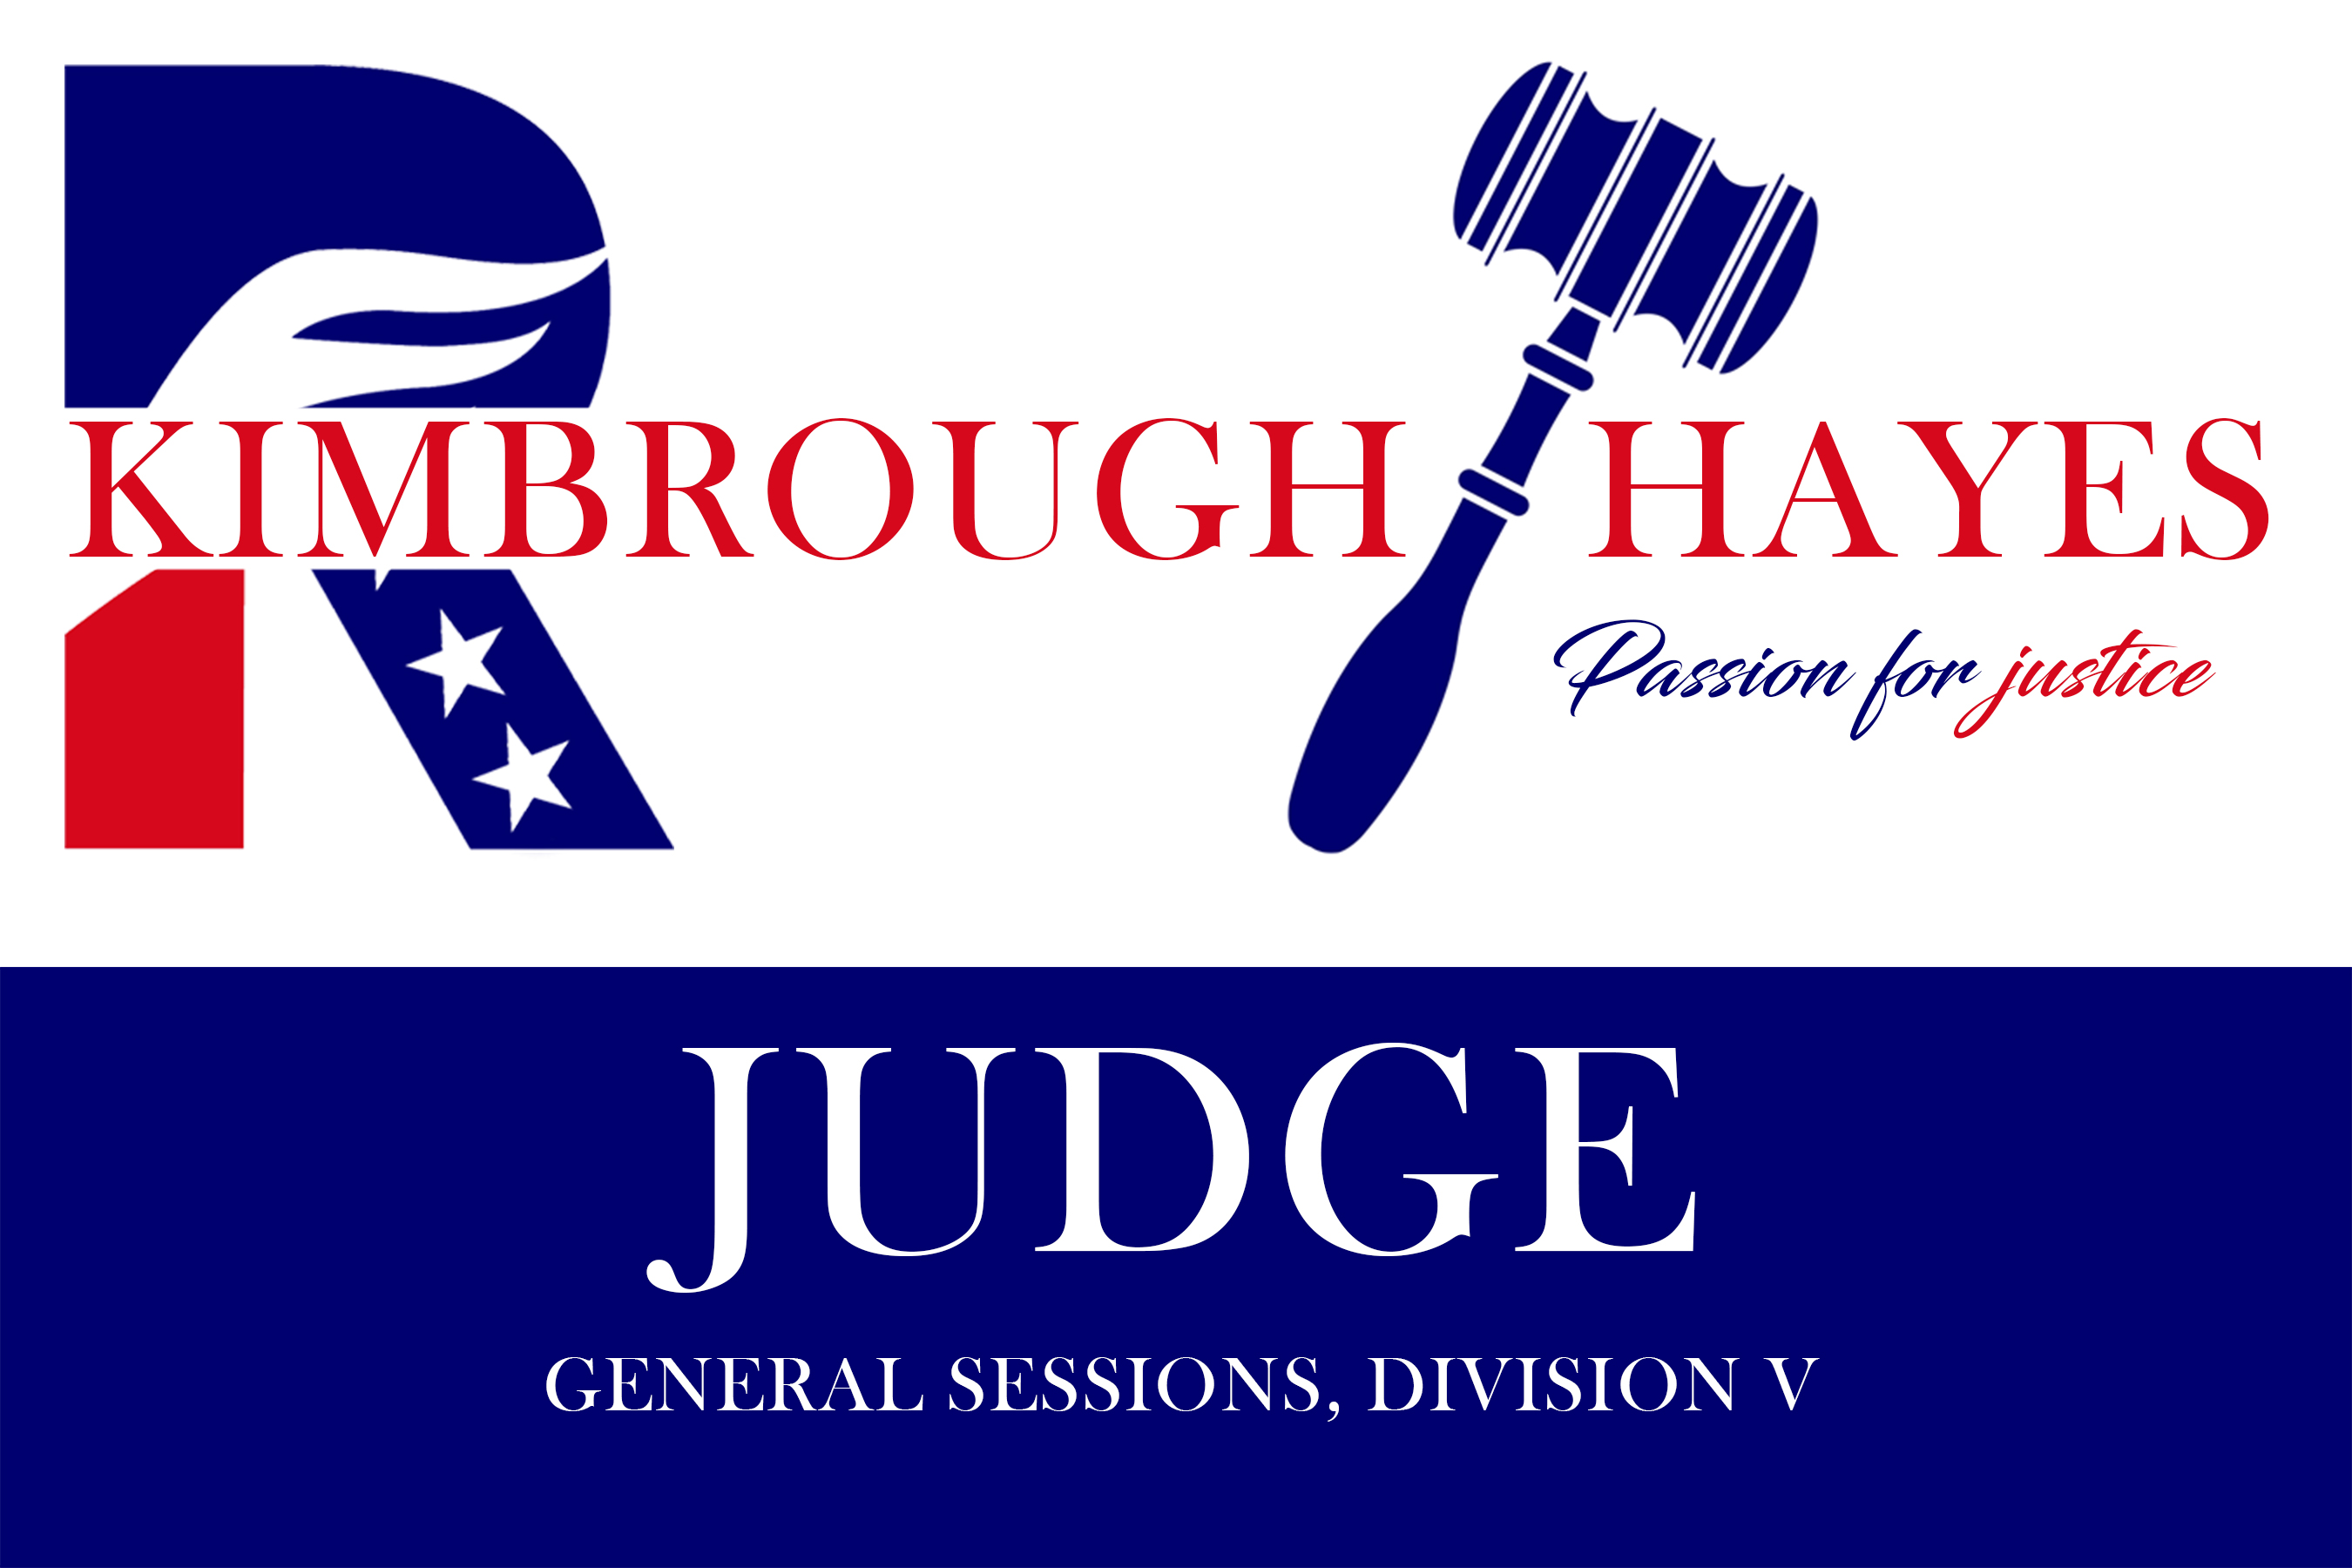 Friends for Robin Kimbrough Hayes for Judge